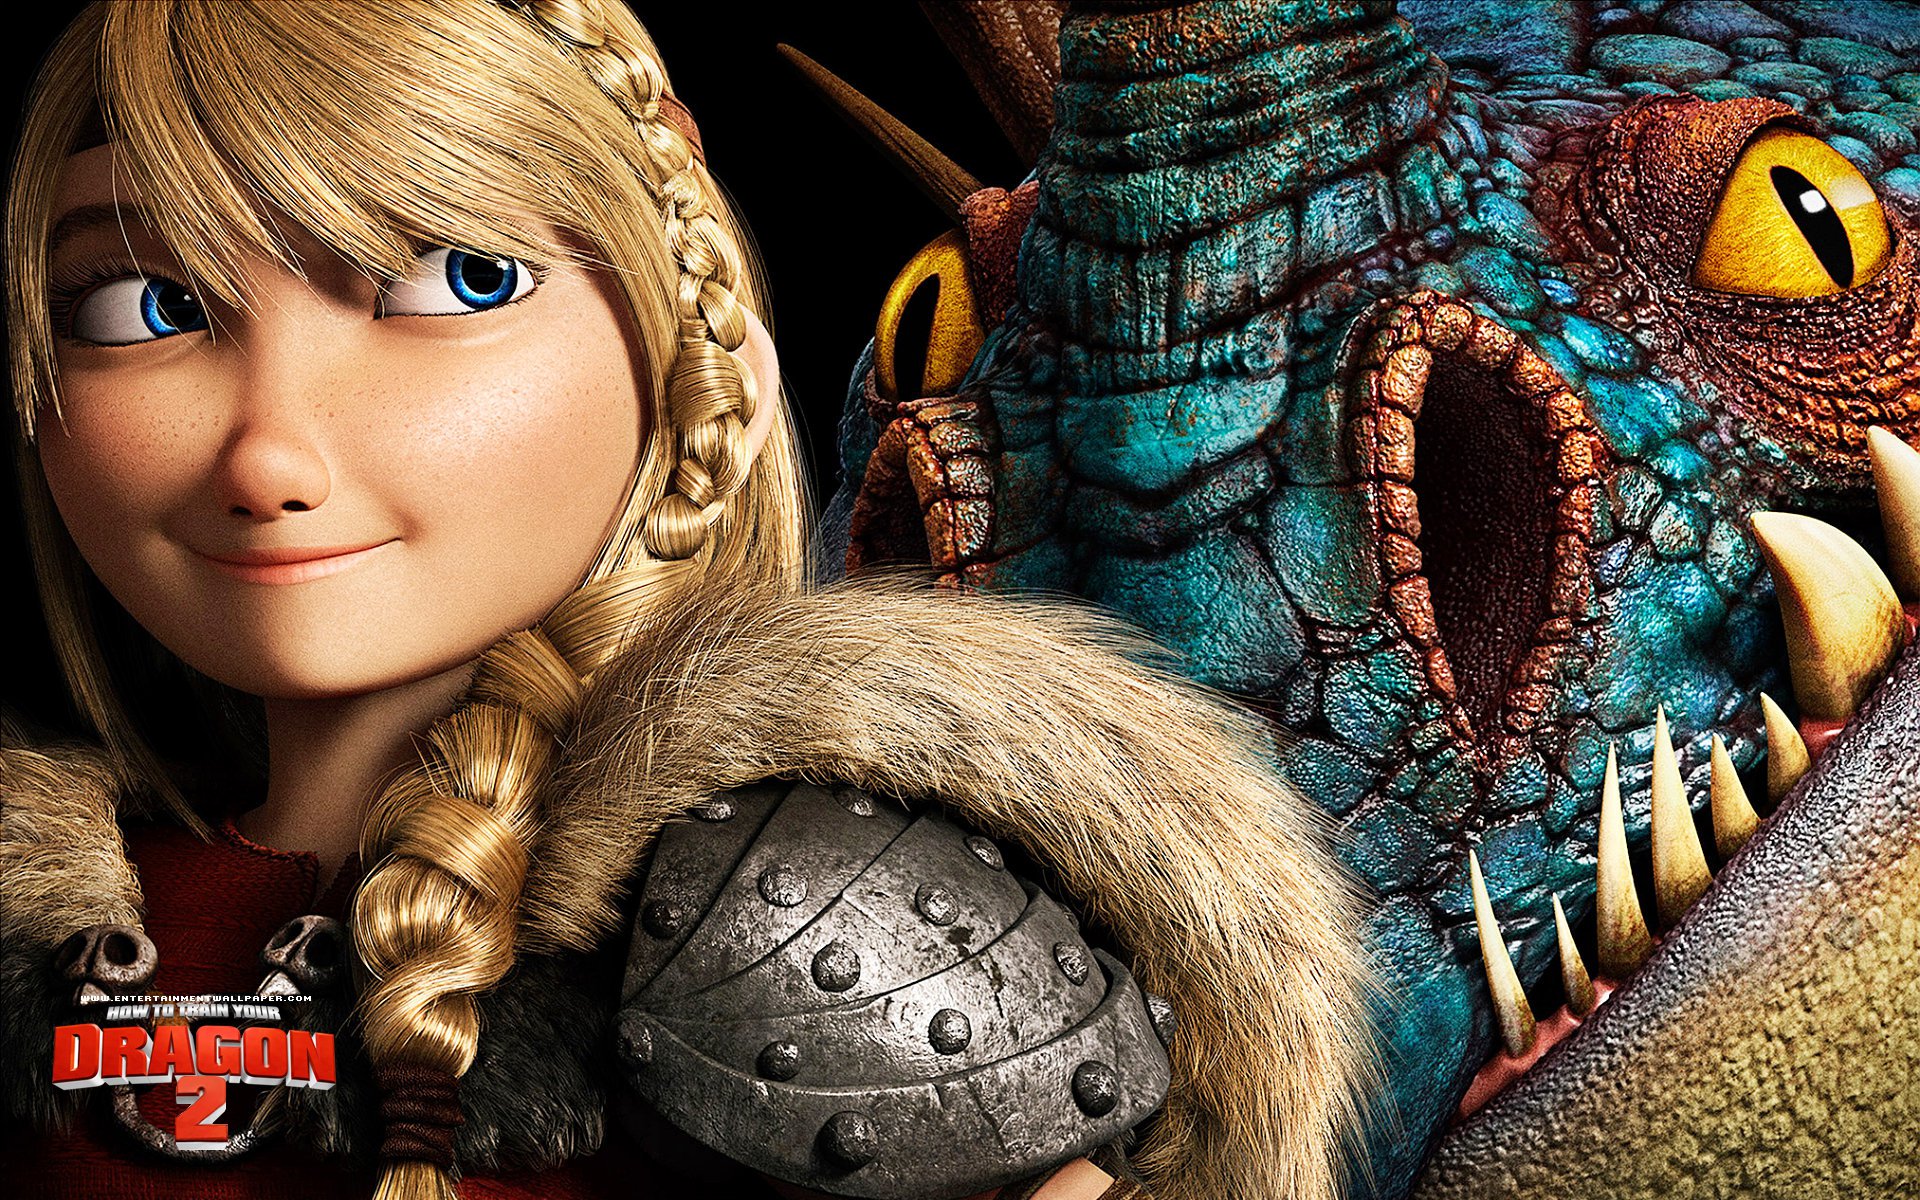 How To Train Your Dragon Baby Dragons Wallpaper
the - Astrid From How To Train Your Dragons - HD Wallpaper 